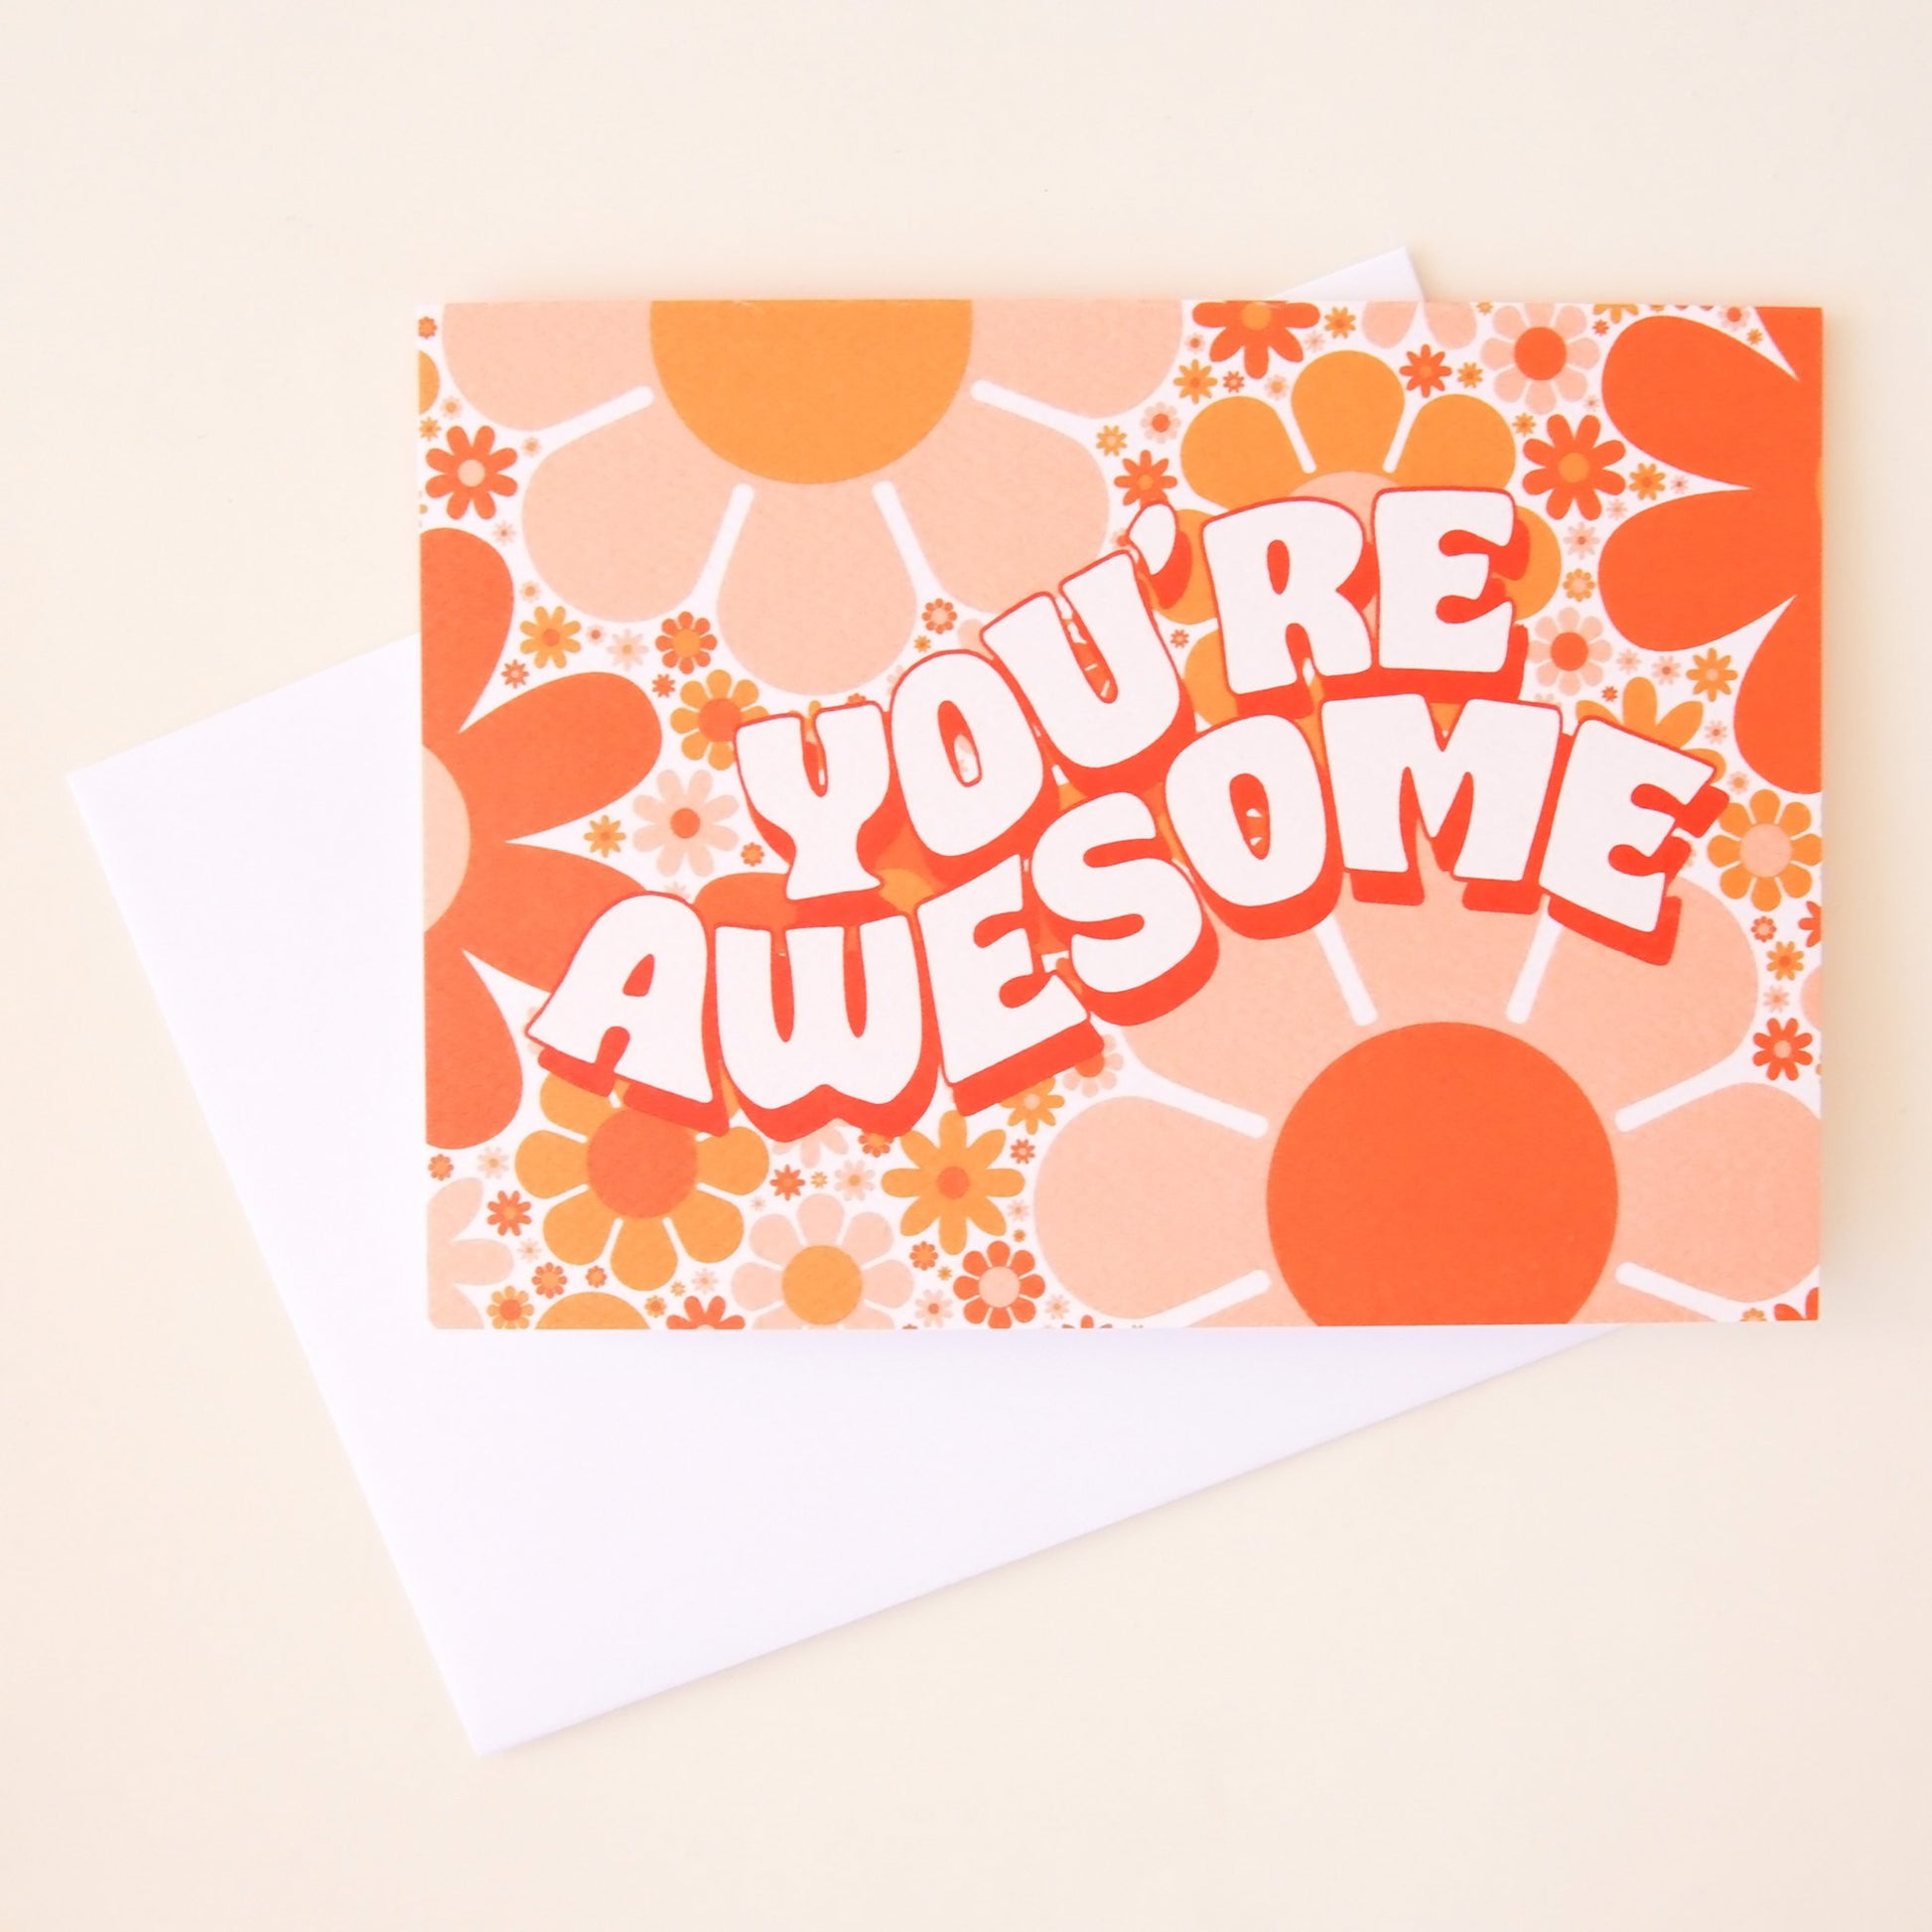 Card filled with orange and pink retro flower design. The car dreads 'you're awesome' in white curved bubble lettering with tangerine orange shadow detailing.